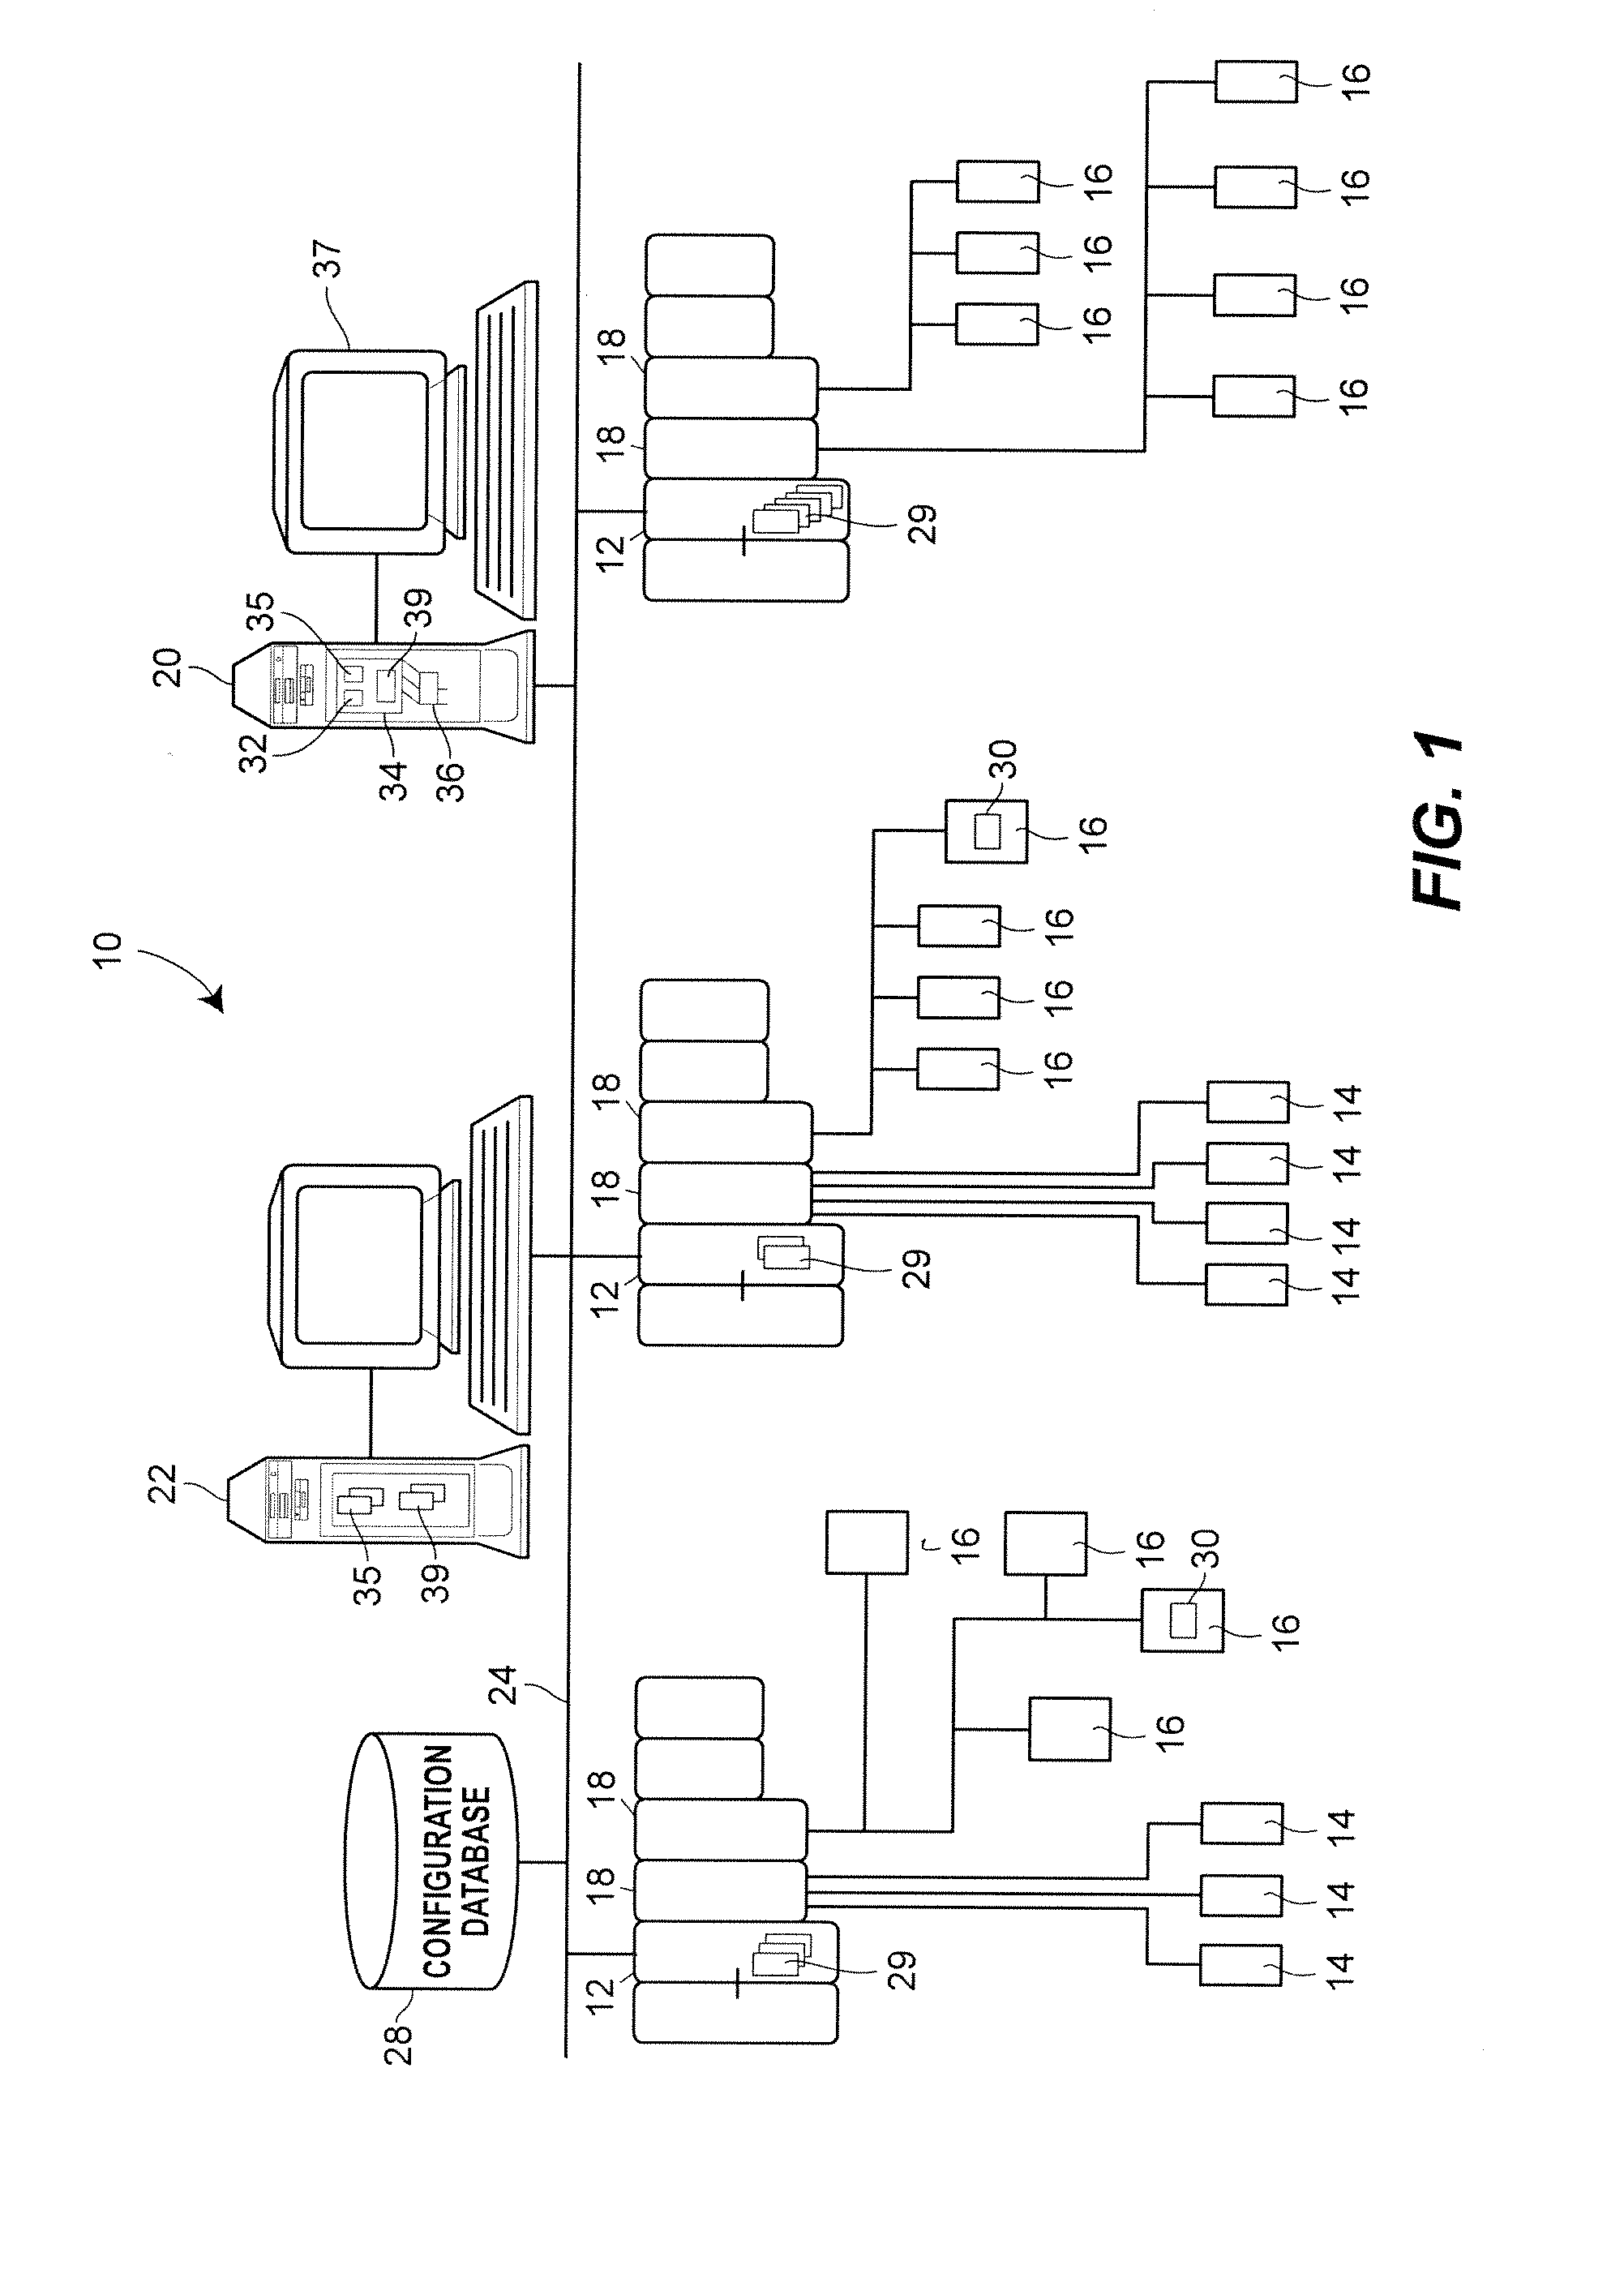 Efficient Design and Configuration of Elements in a Process Control System